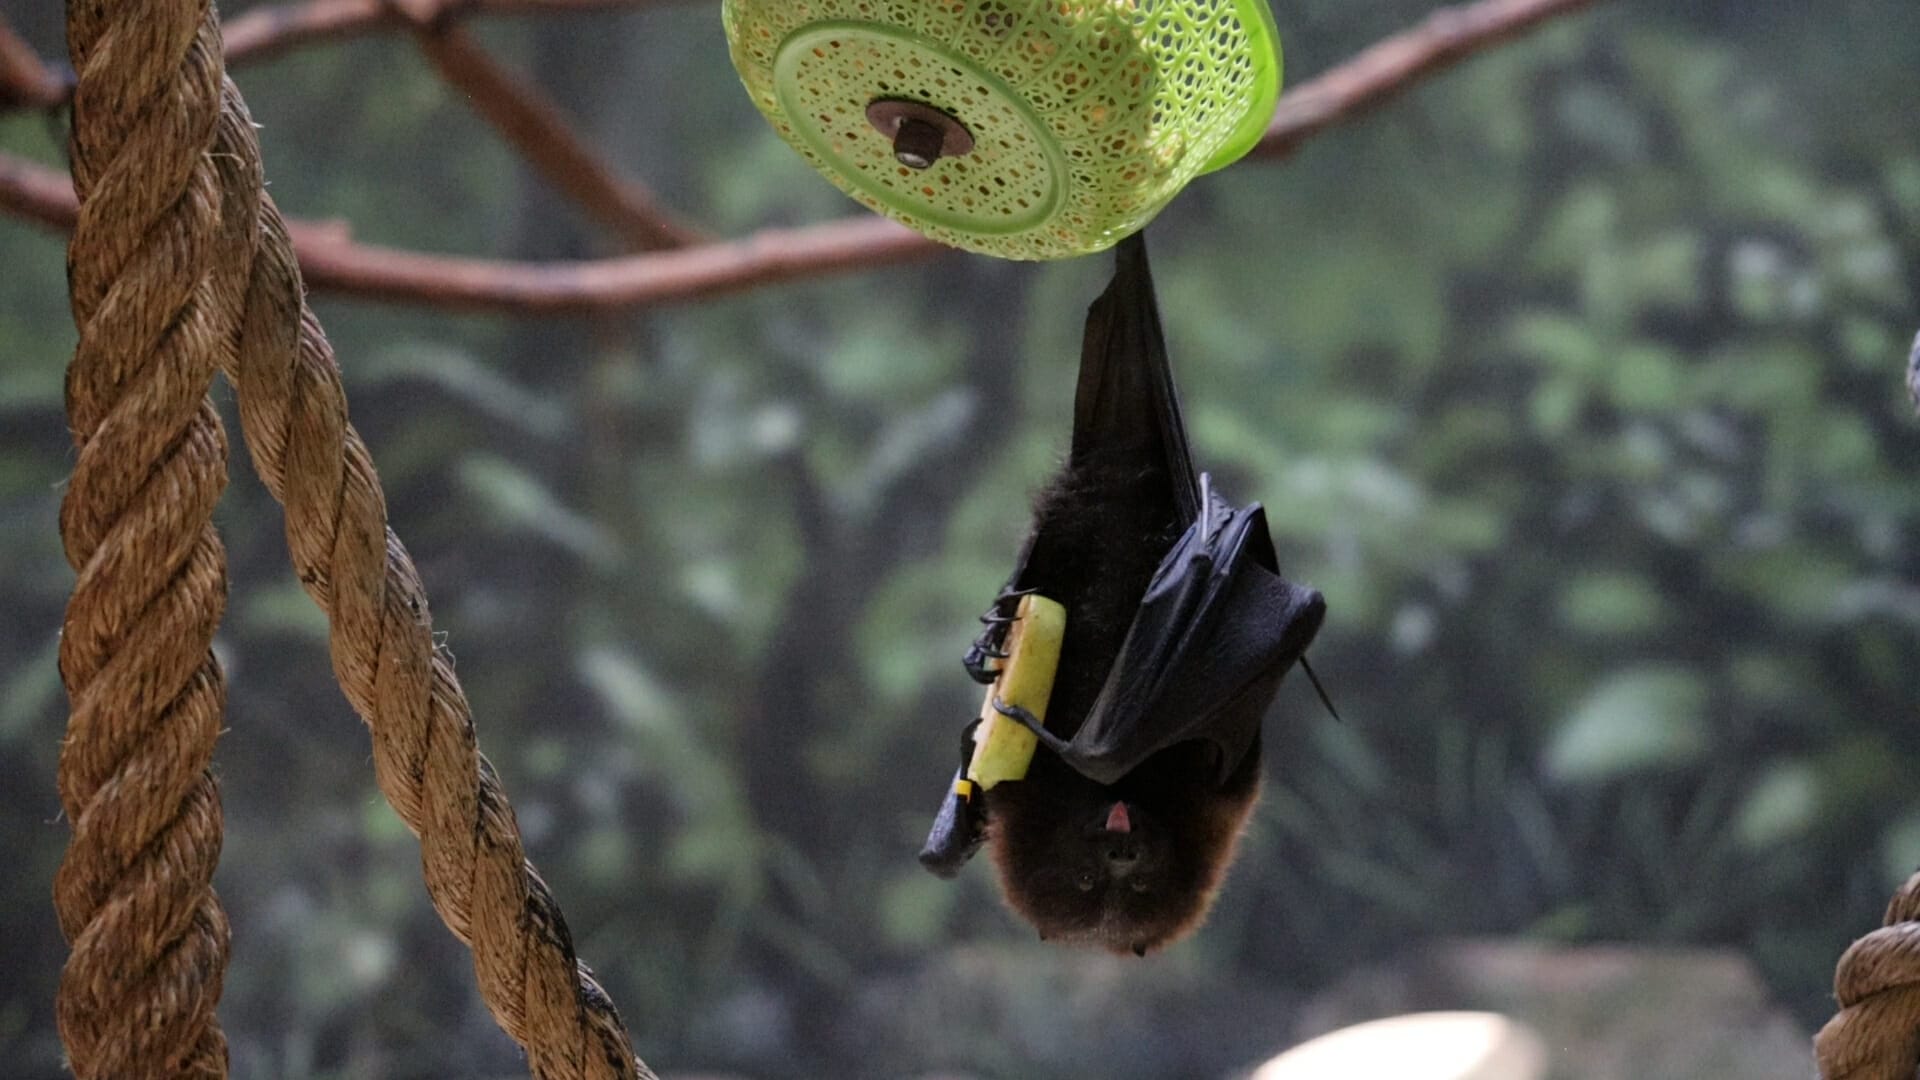 Philadelphia Zoo works with The Rodrigues Environmental Educator Project to protect the endangered Rodrigues Fruit Bat. Credit  Philadelphia Zoo